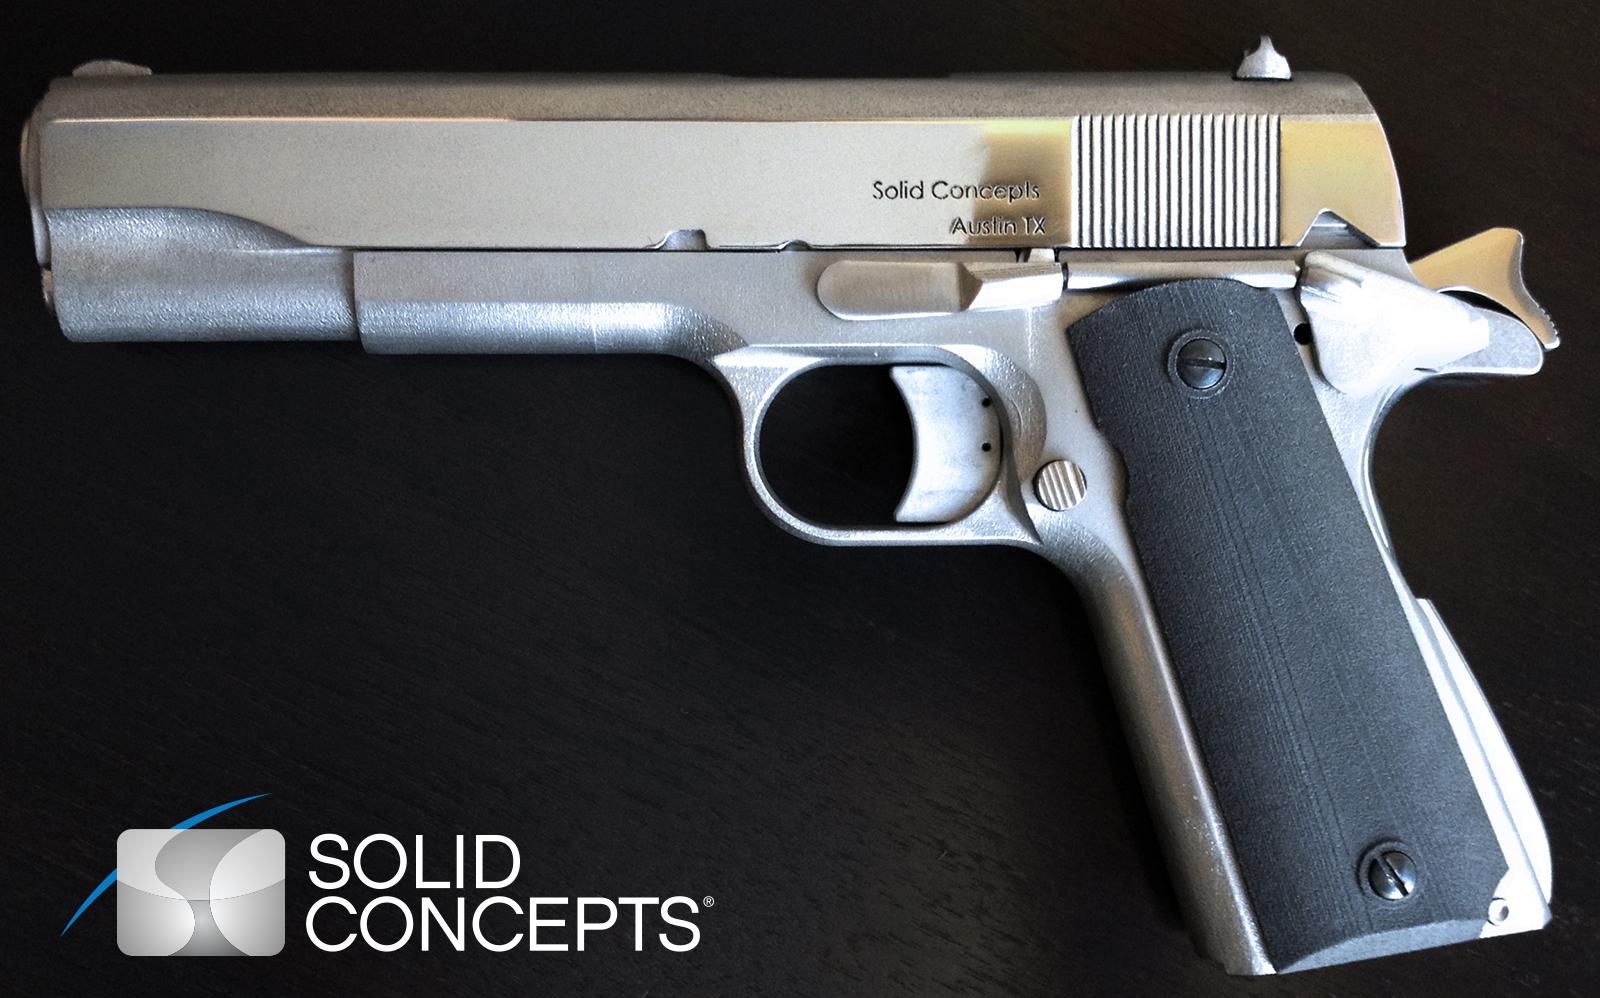 File:The Solid Concepts 3D printed 1911 pistol.jpg - Image of 3D Printing, 3D printing